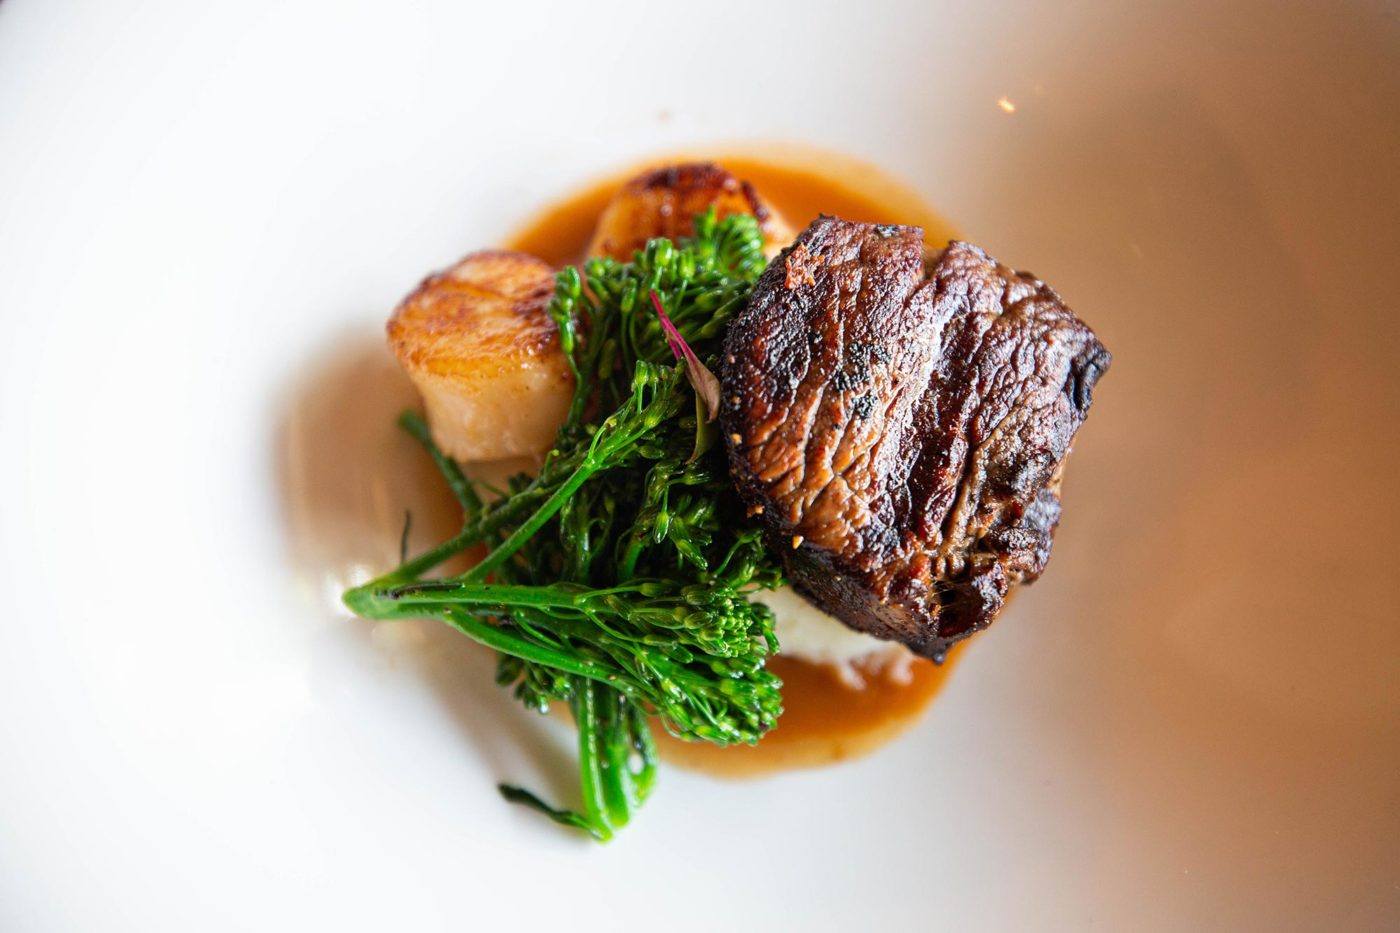 award winning steaks served at Seared in Petaluma sourced from local butchery, Flannery Beef in San Francisco